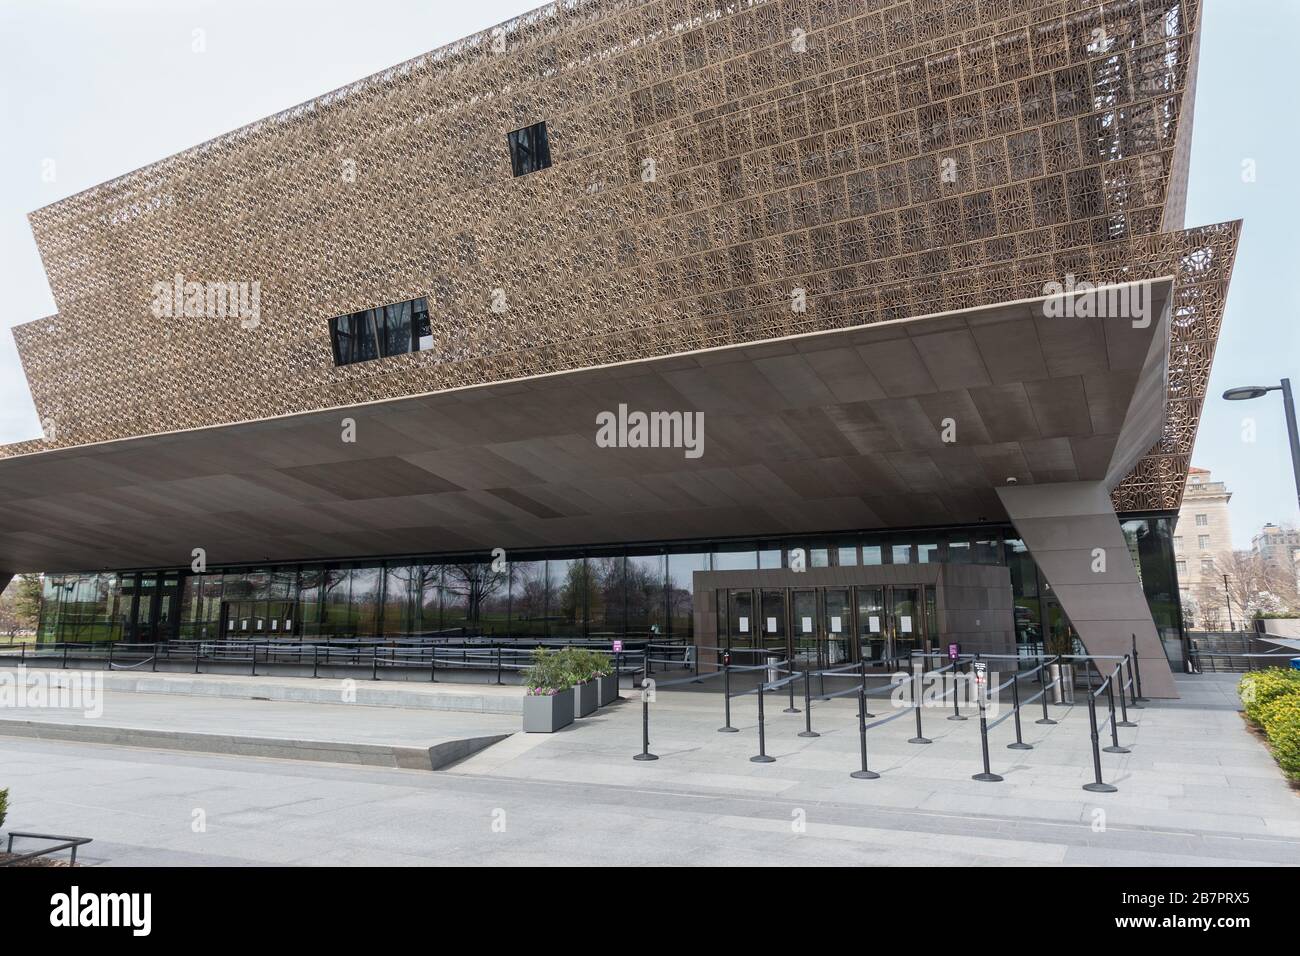 Usually crowded with tourists, the entrance to the Museum of African American History and Culture in Washington, DC is deserted, as all museums were closed for coronavirus precautions. MArch 16, 2020. Stock Photo